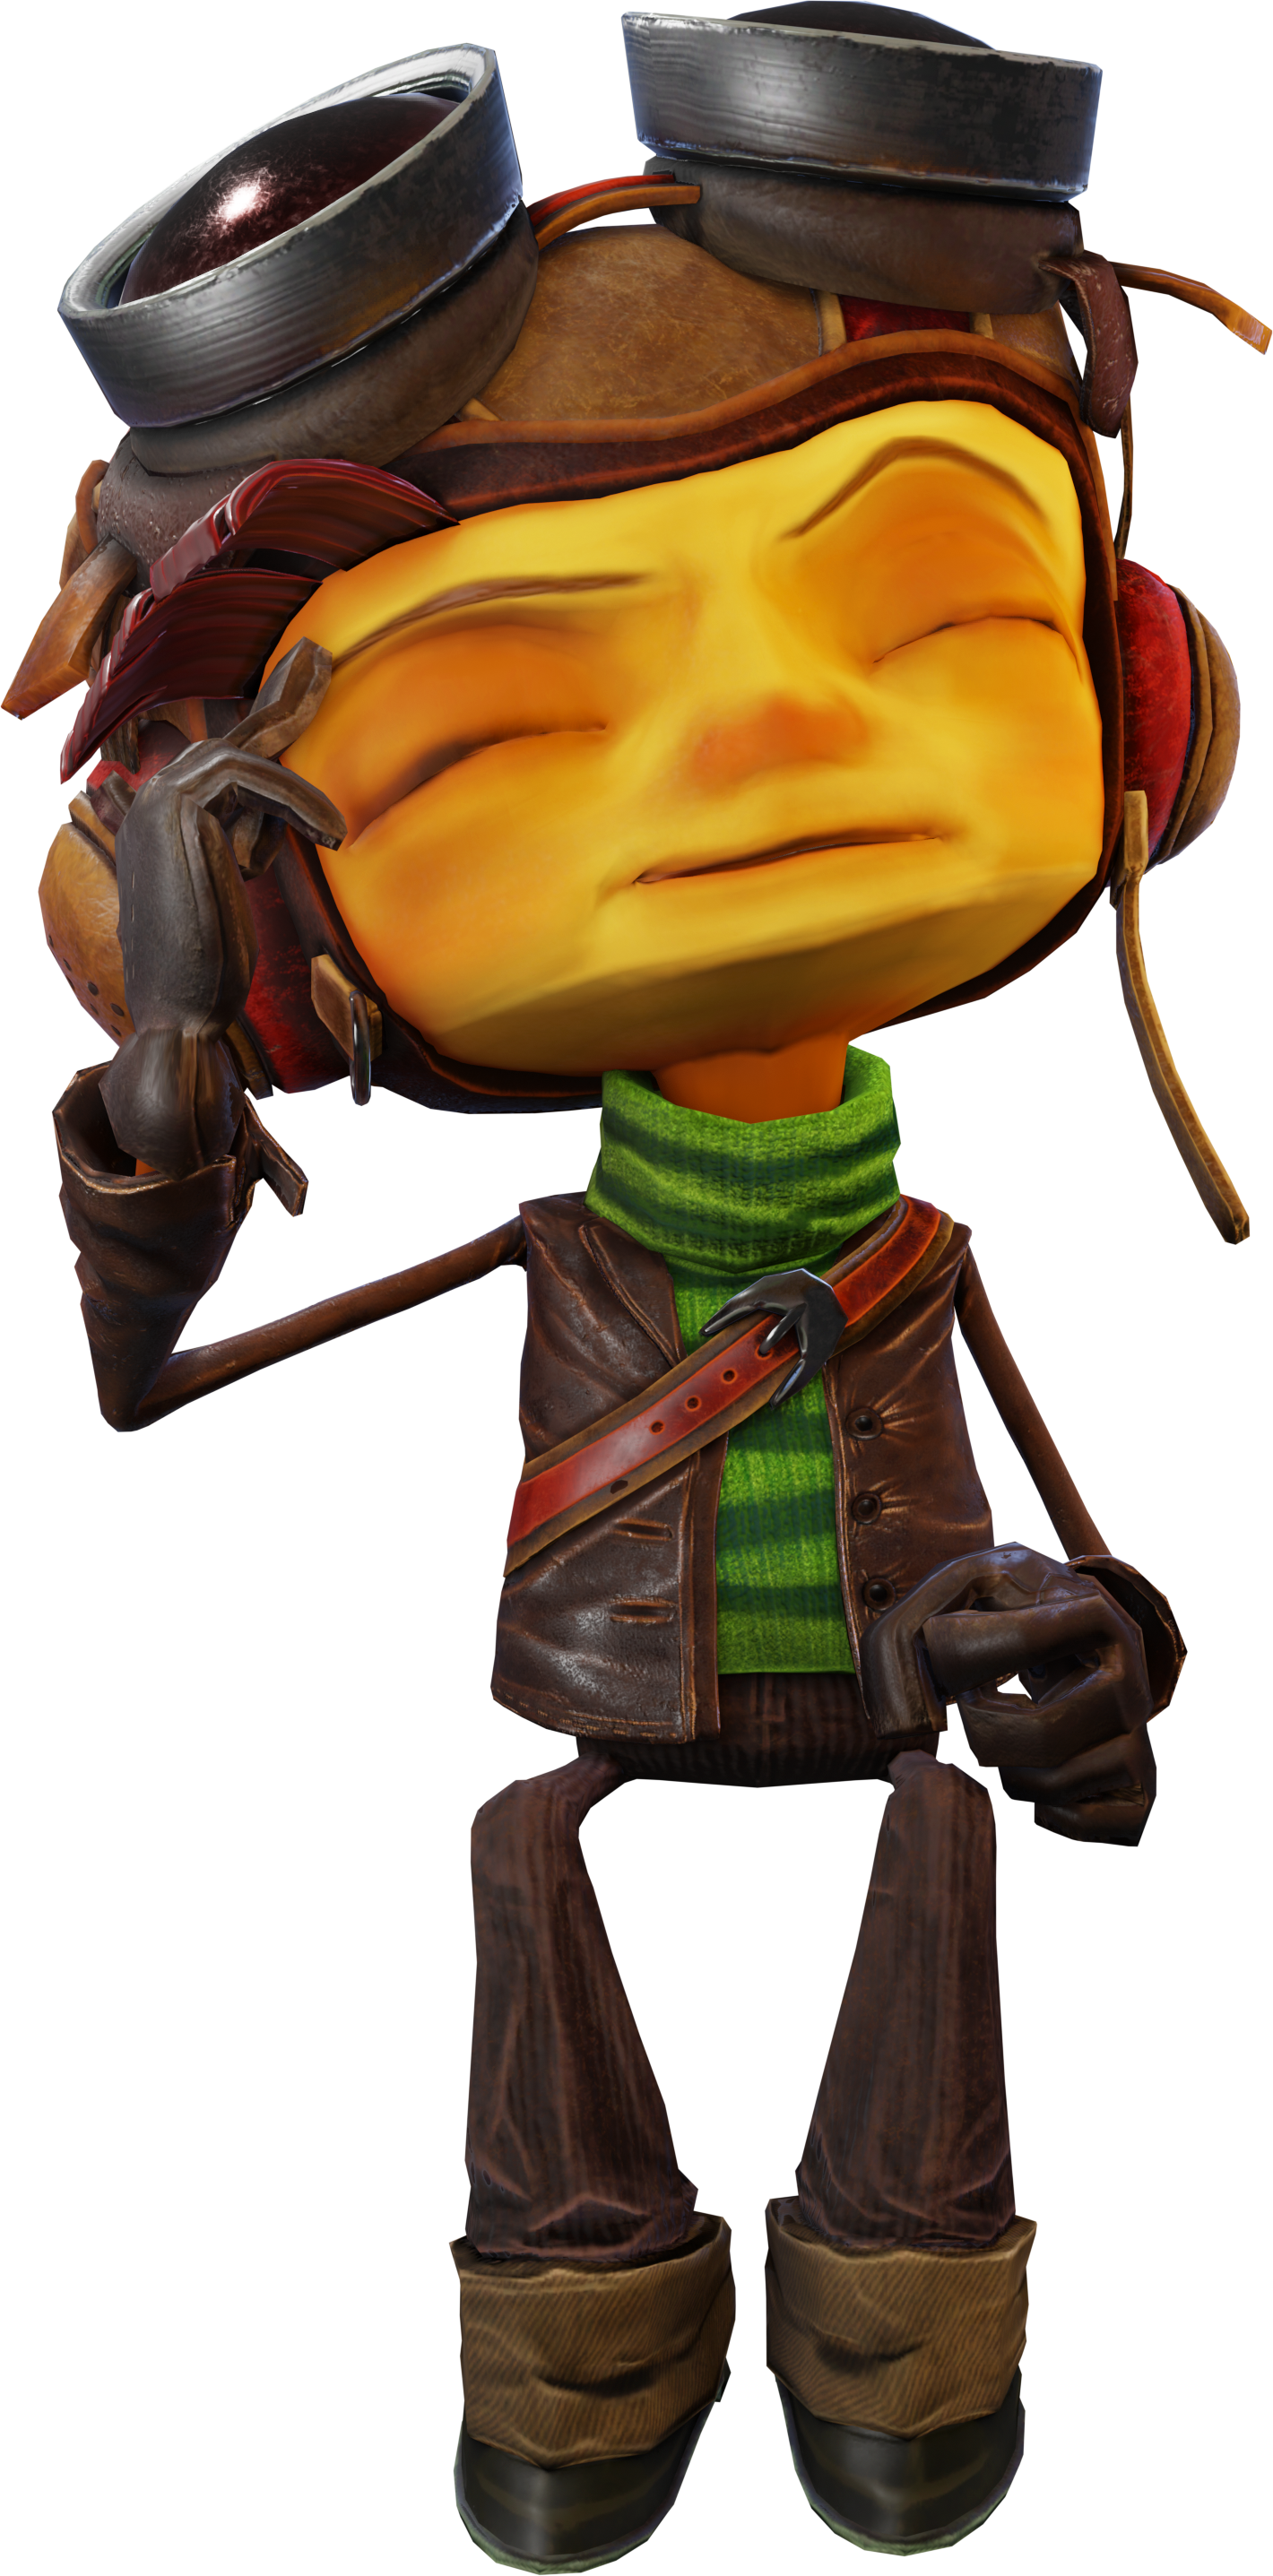 Psychonauts 2's Criticized Graphics Are a GOOD Thing